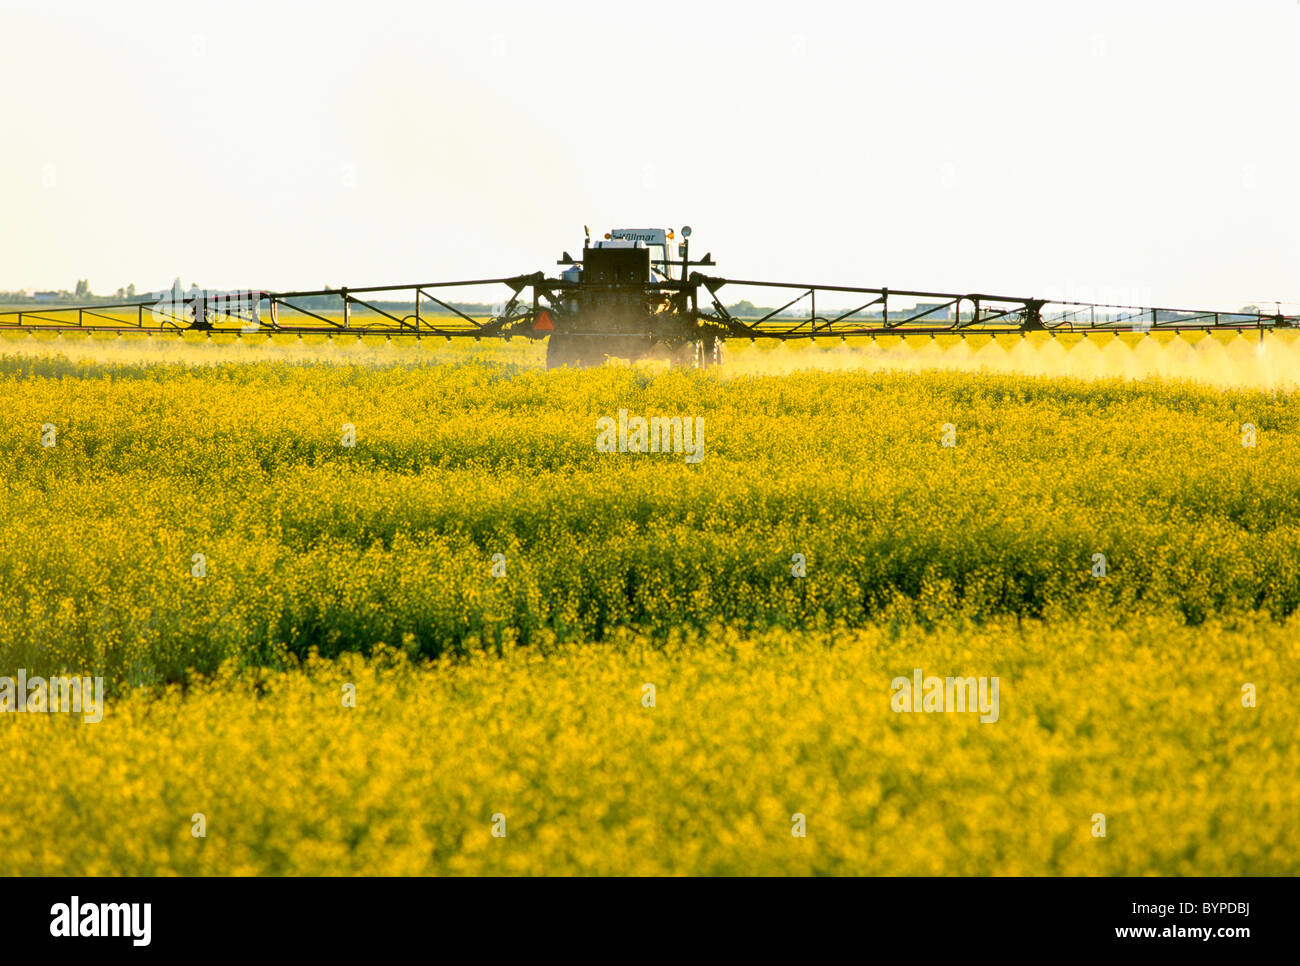 Agriculture - Chemical application of fungicide on a blooming canola crop / Lorette, Manitoba, Canada. Stock Photo